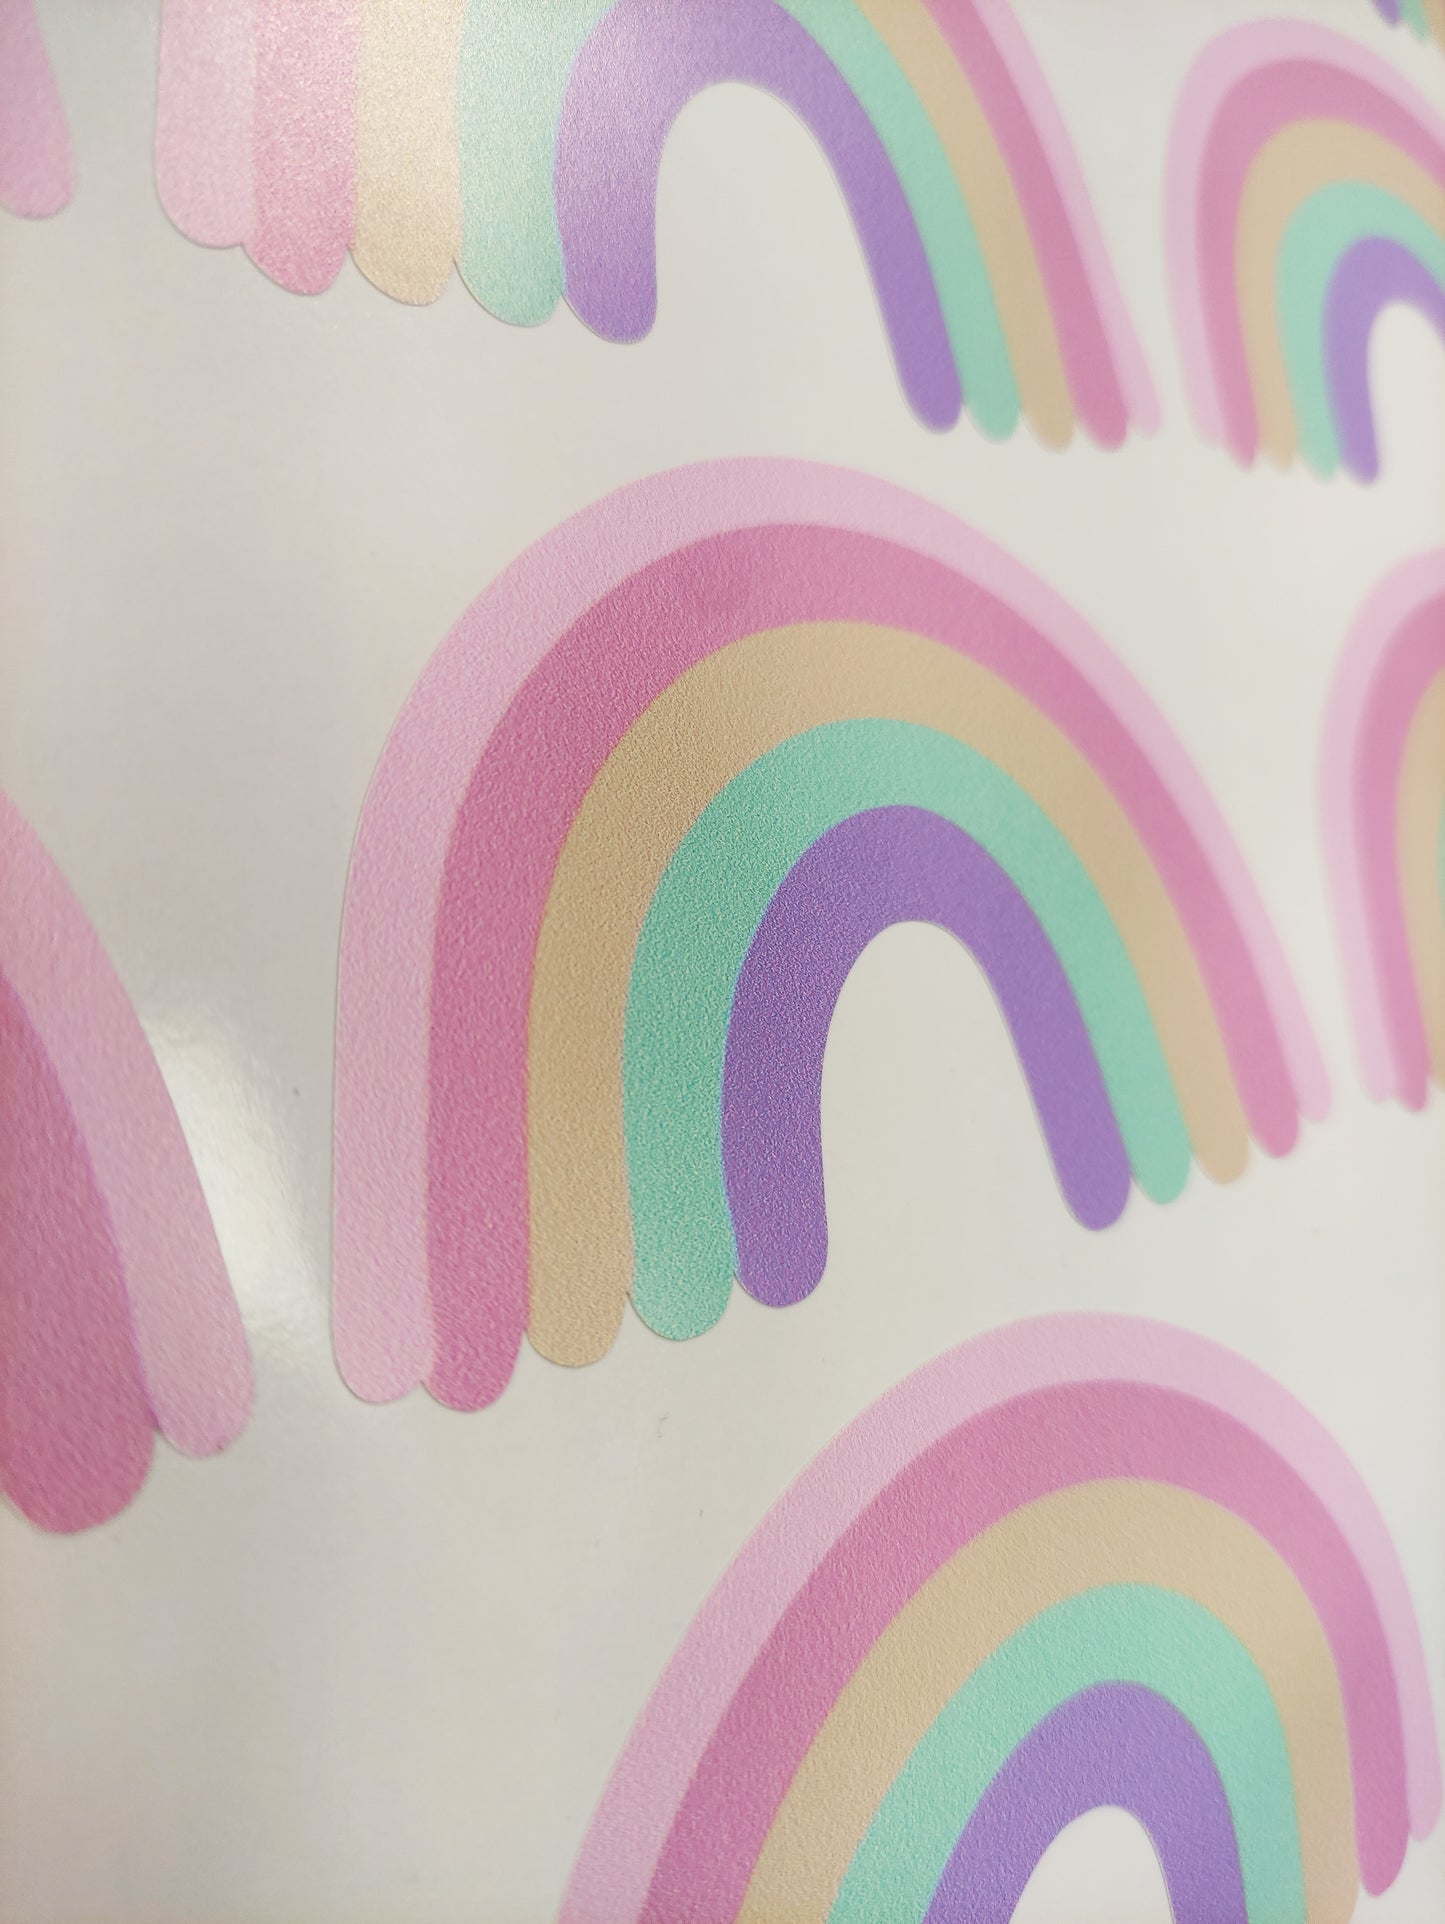 24 Pastel Colour Rainbows Wall Stickers